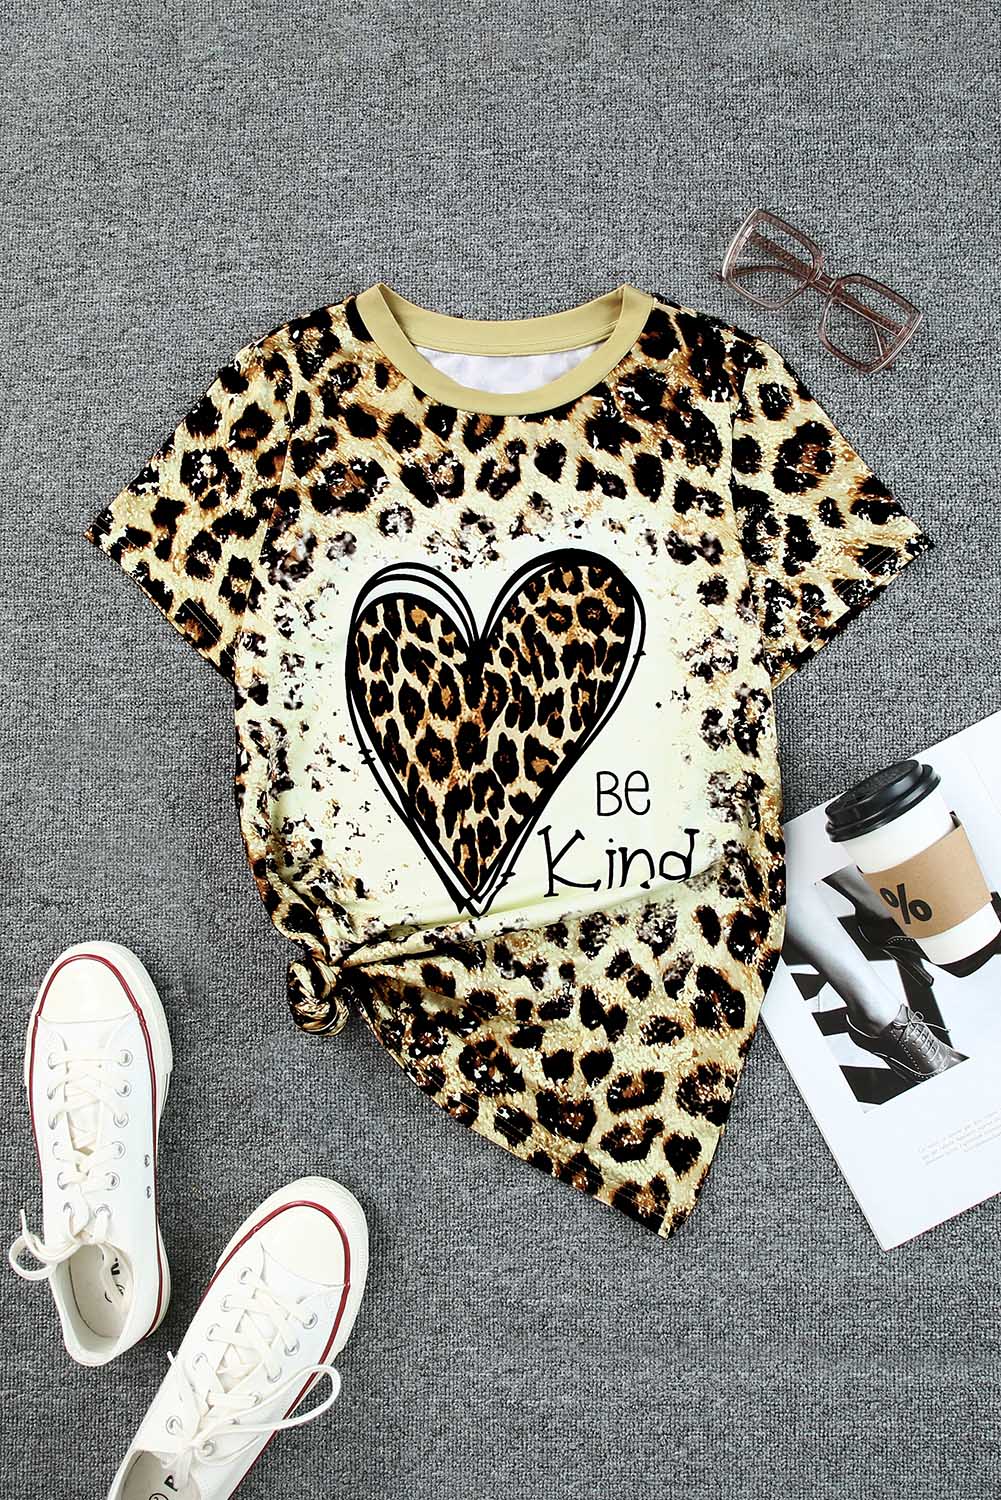 LC25219229-20-S, LC25219229-20-M, LC25219229-20-L, LC25219229-20-XL, Leopard Be Kind Heart Graphic Print T Shirt Heart Valentine Graphic Tee 